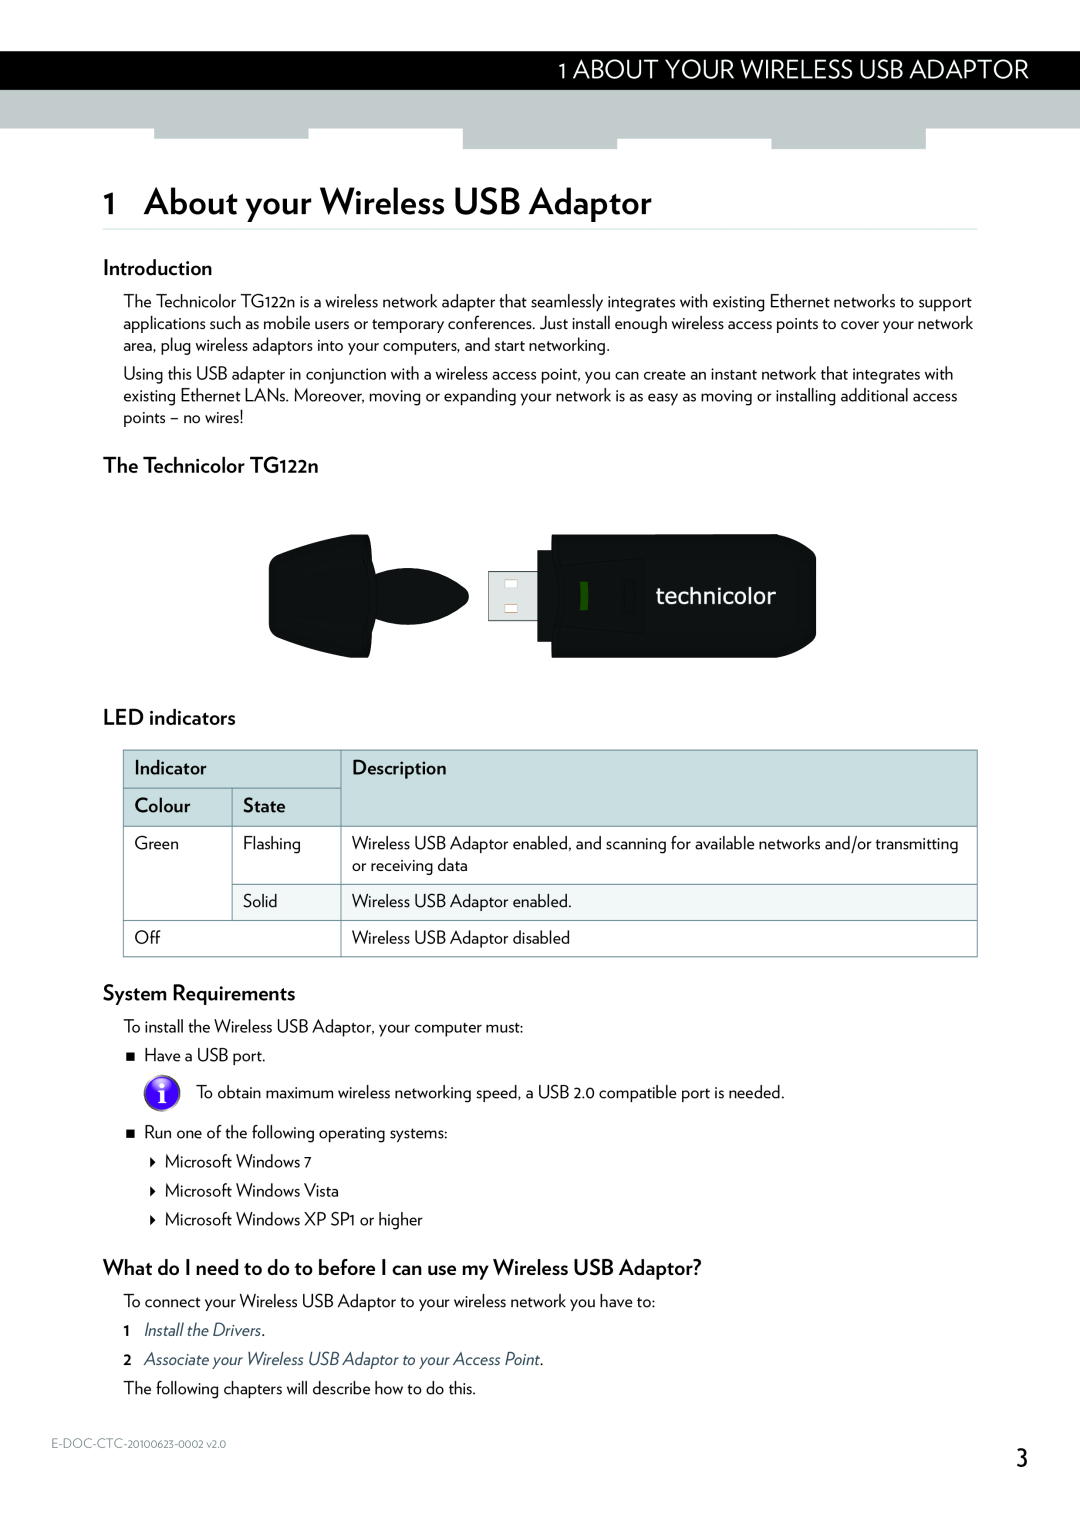 Technicolor - Thomson TG122N About your Wireless USB Adaptor, About Your Wireless Usb Adaptor, Introduction, Indicator 